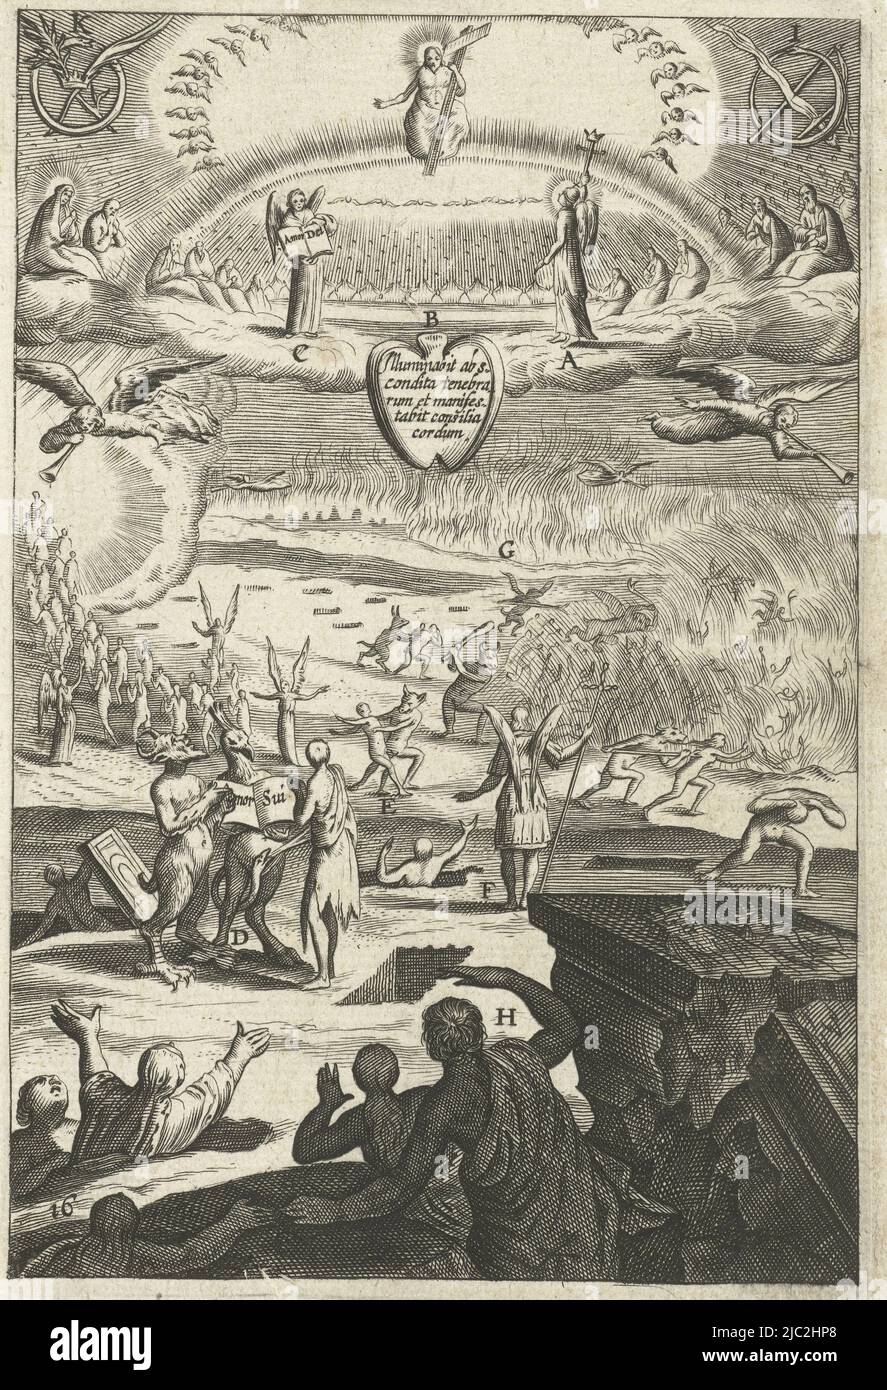 At the last judgment, souls of the devout and the ungodly are sent to heaven or hell. The meditation precept in the issue encourages the reader to consider what is desirable: living in virtue or sin with the moment of the last judgment in view., Emblem with the last judgment for consideration of living in virtue or sin Den wech des eeuwich levens (series title), Boëtius Adamsz. Bolswert, print maker: anonymous, publisher: Hendrik Aertssens (II), Antwerp, 1620 - 1623 and/or 1623, paper, engraving, h 140 mm × w 95 mm Stock Photo